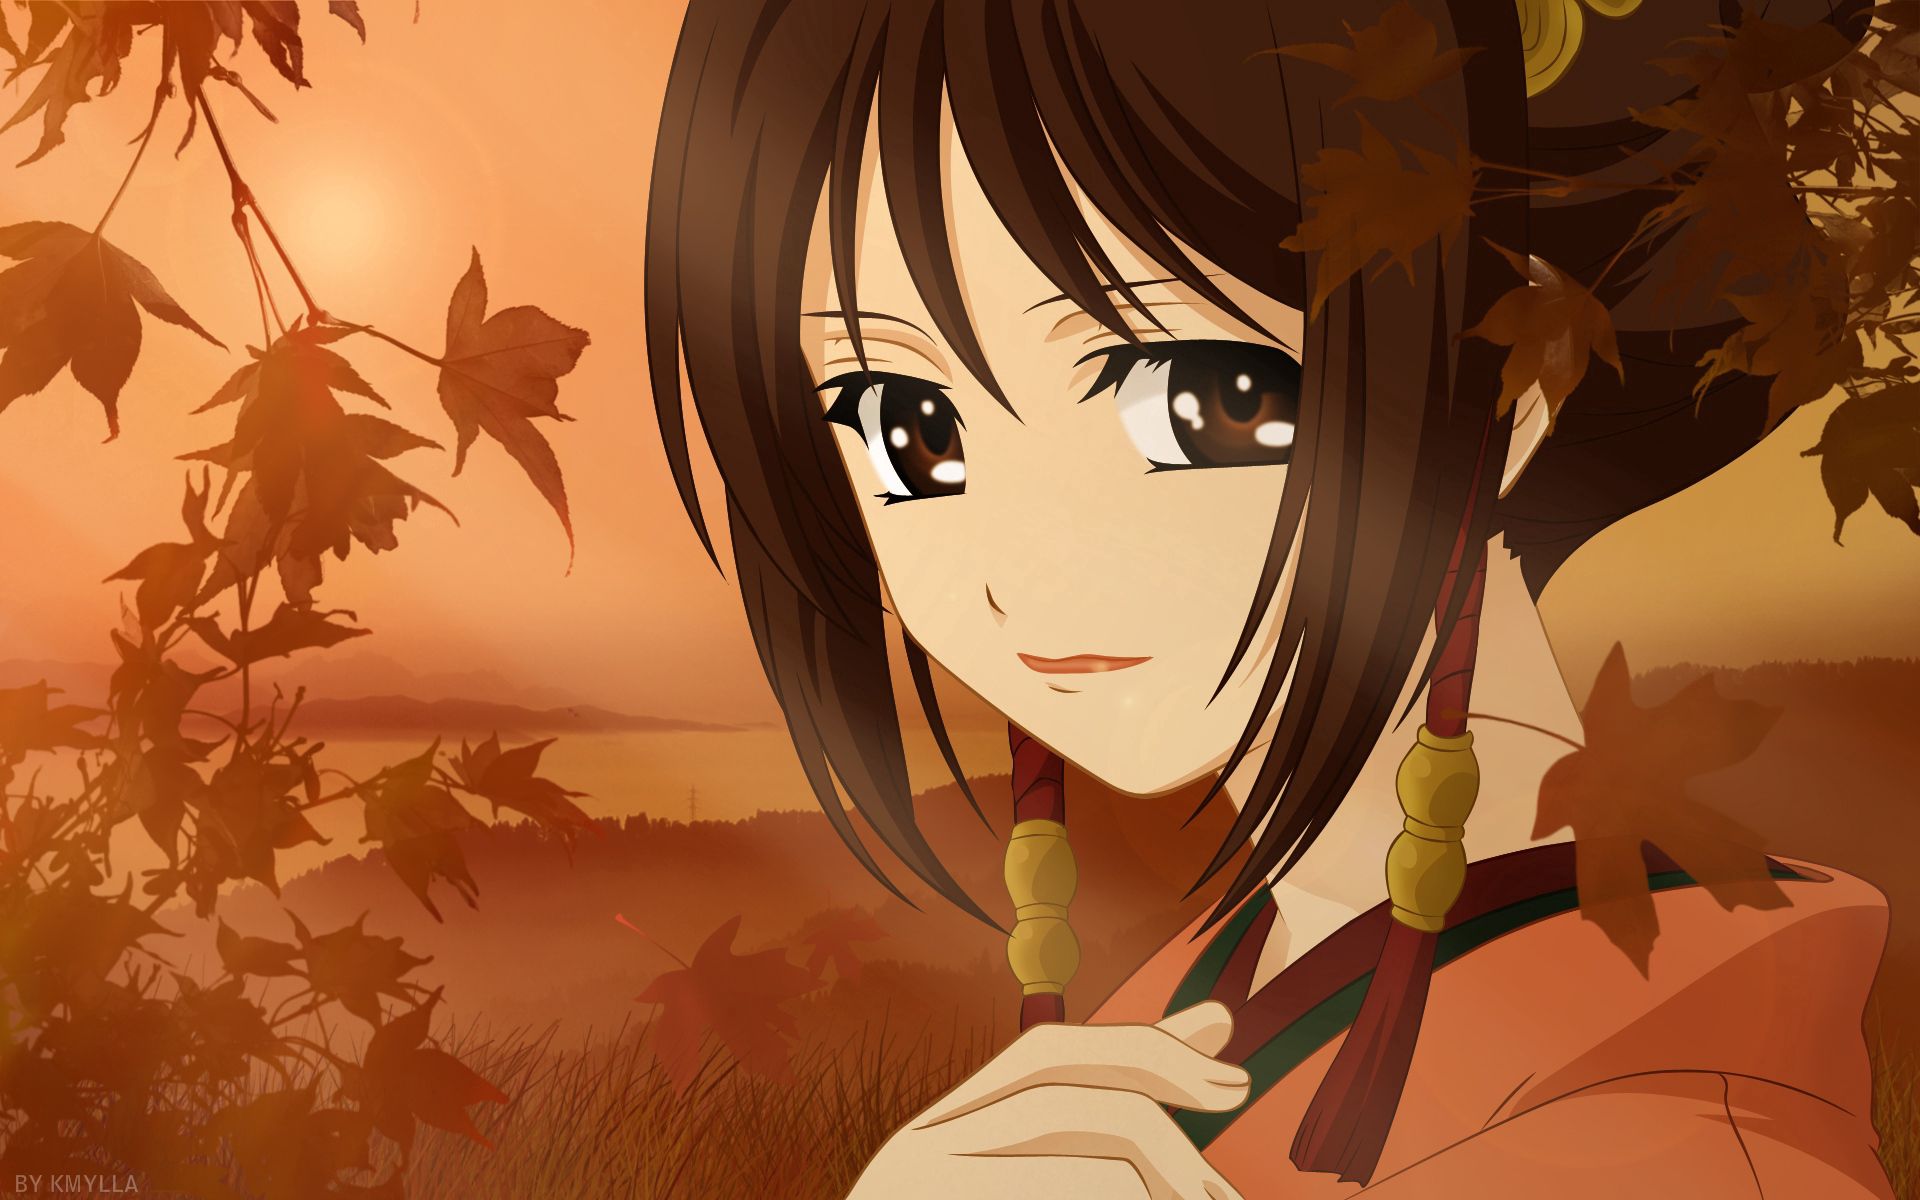 57465 download wallpaper anime, eyes, sadness, girl, sorrow, brunette, earrings screensavers and pictures for free